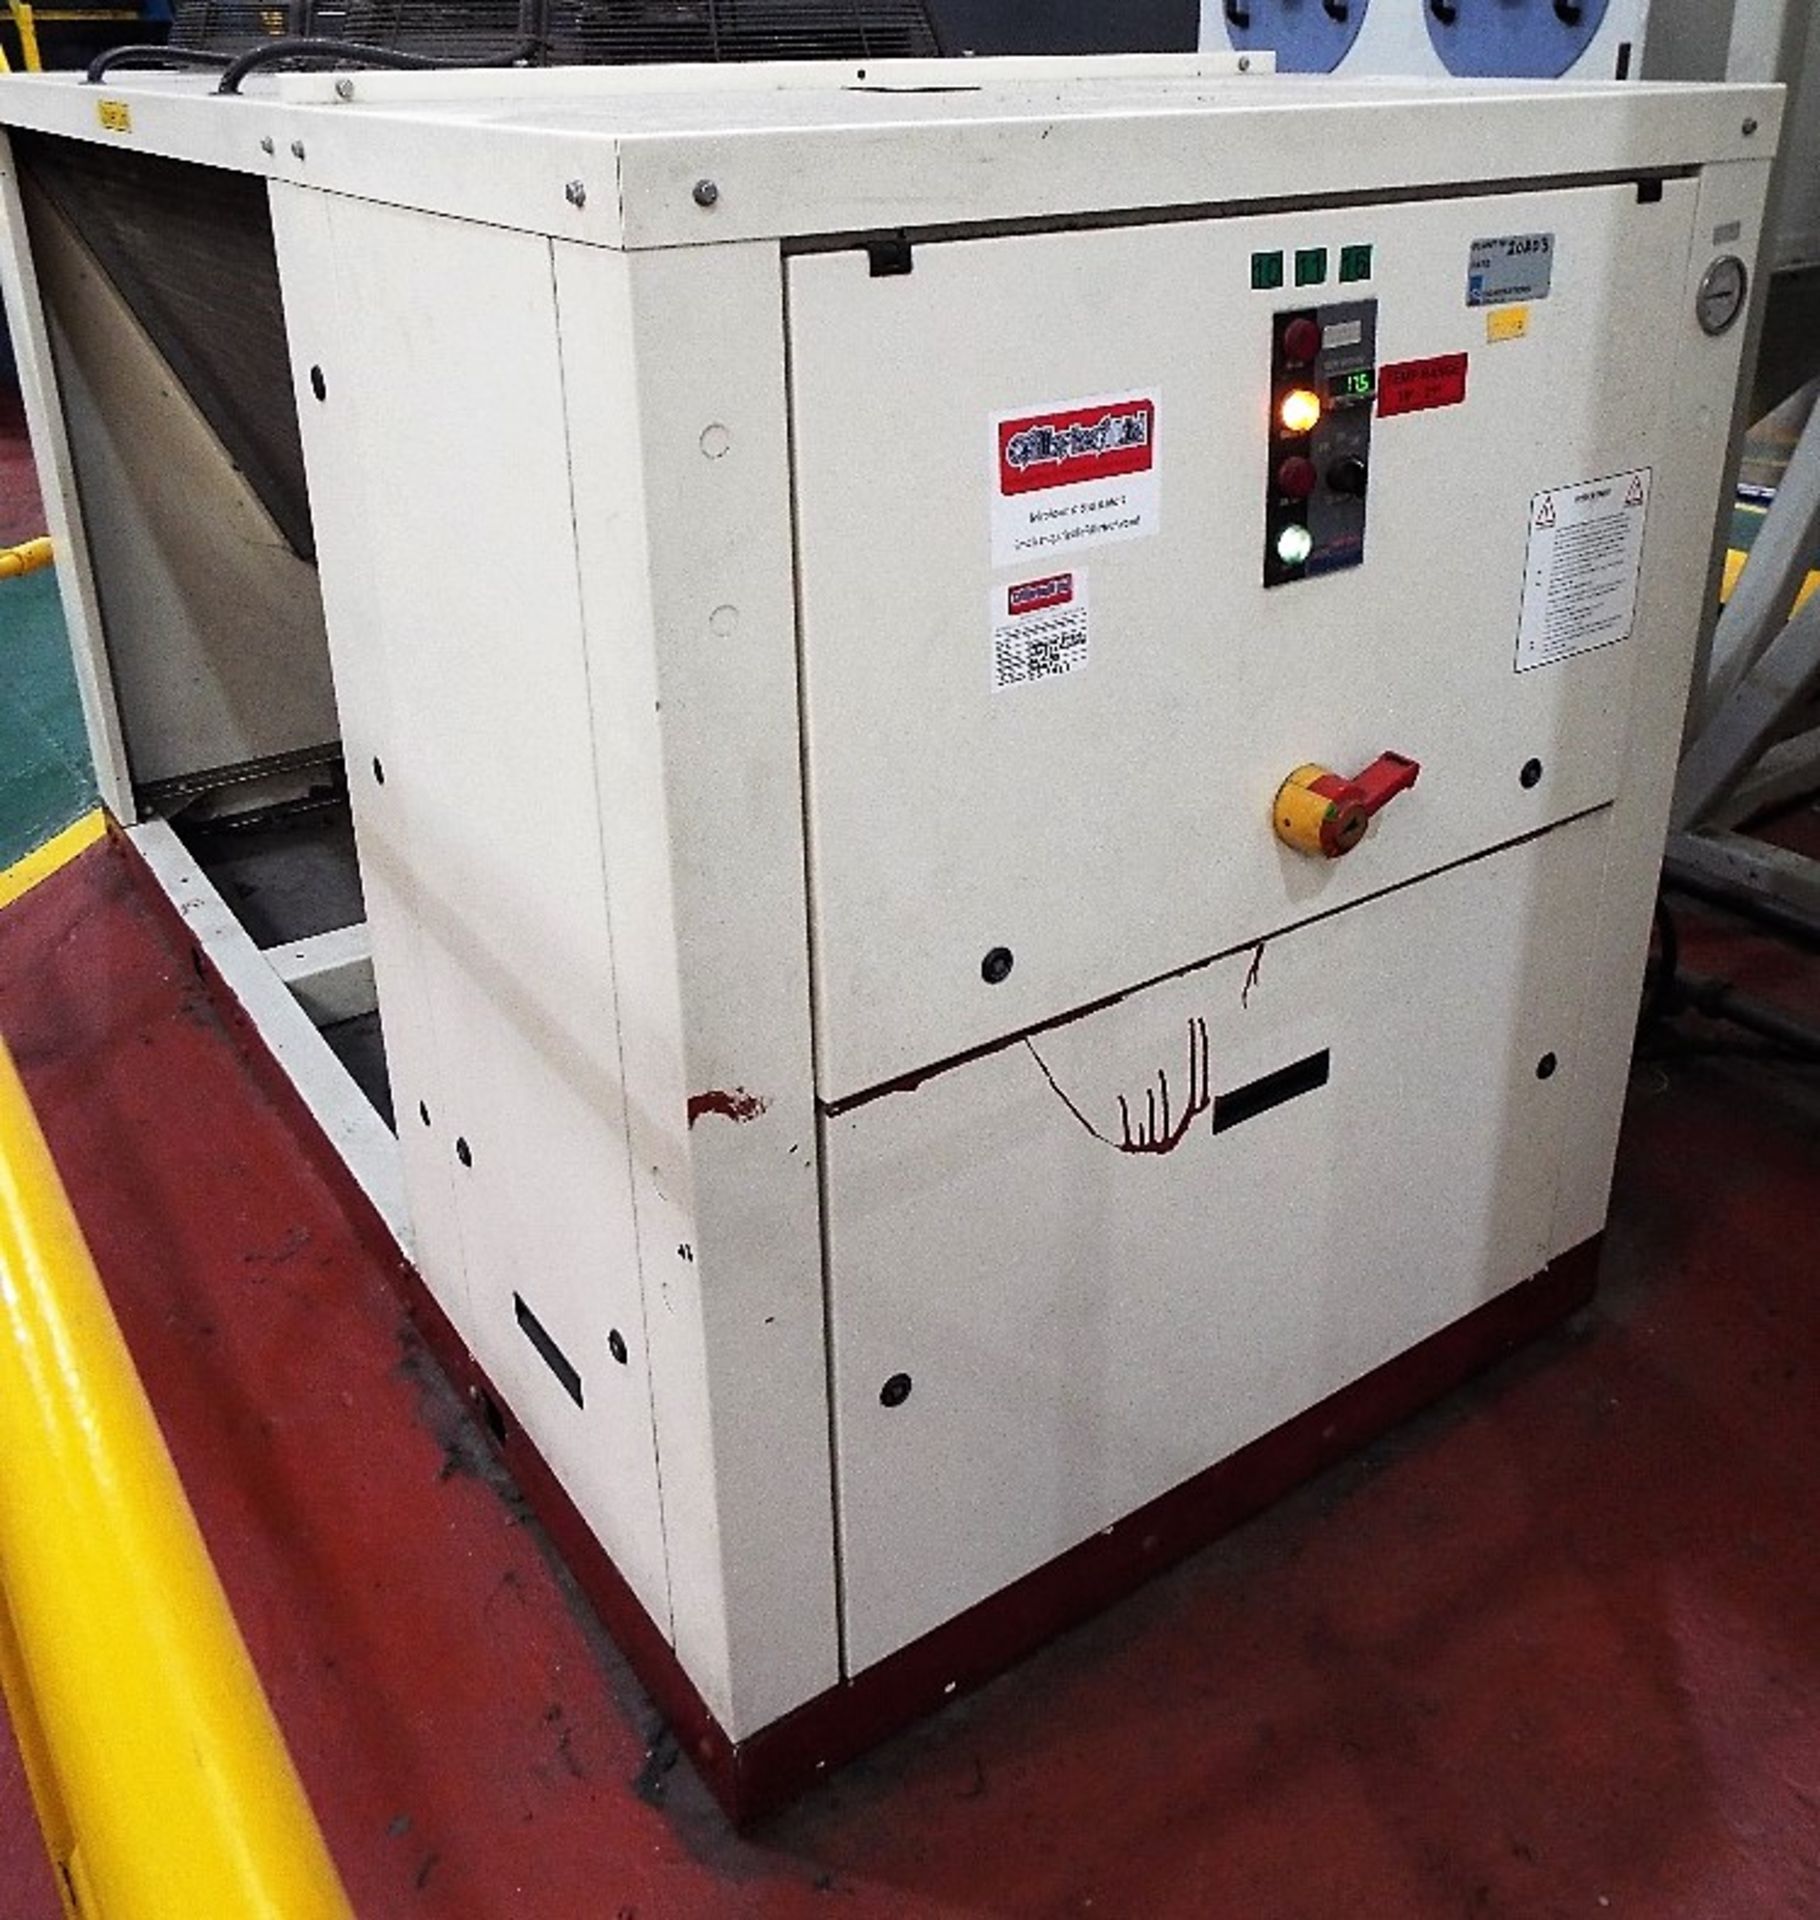 Lumonics Laserdyne 890 Beam Director Multiaxis Laser System cw Dust Extractor and Chilling Unit. - Image 26 of 36